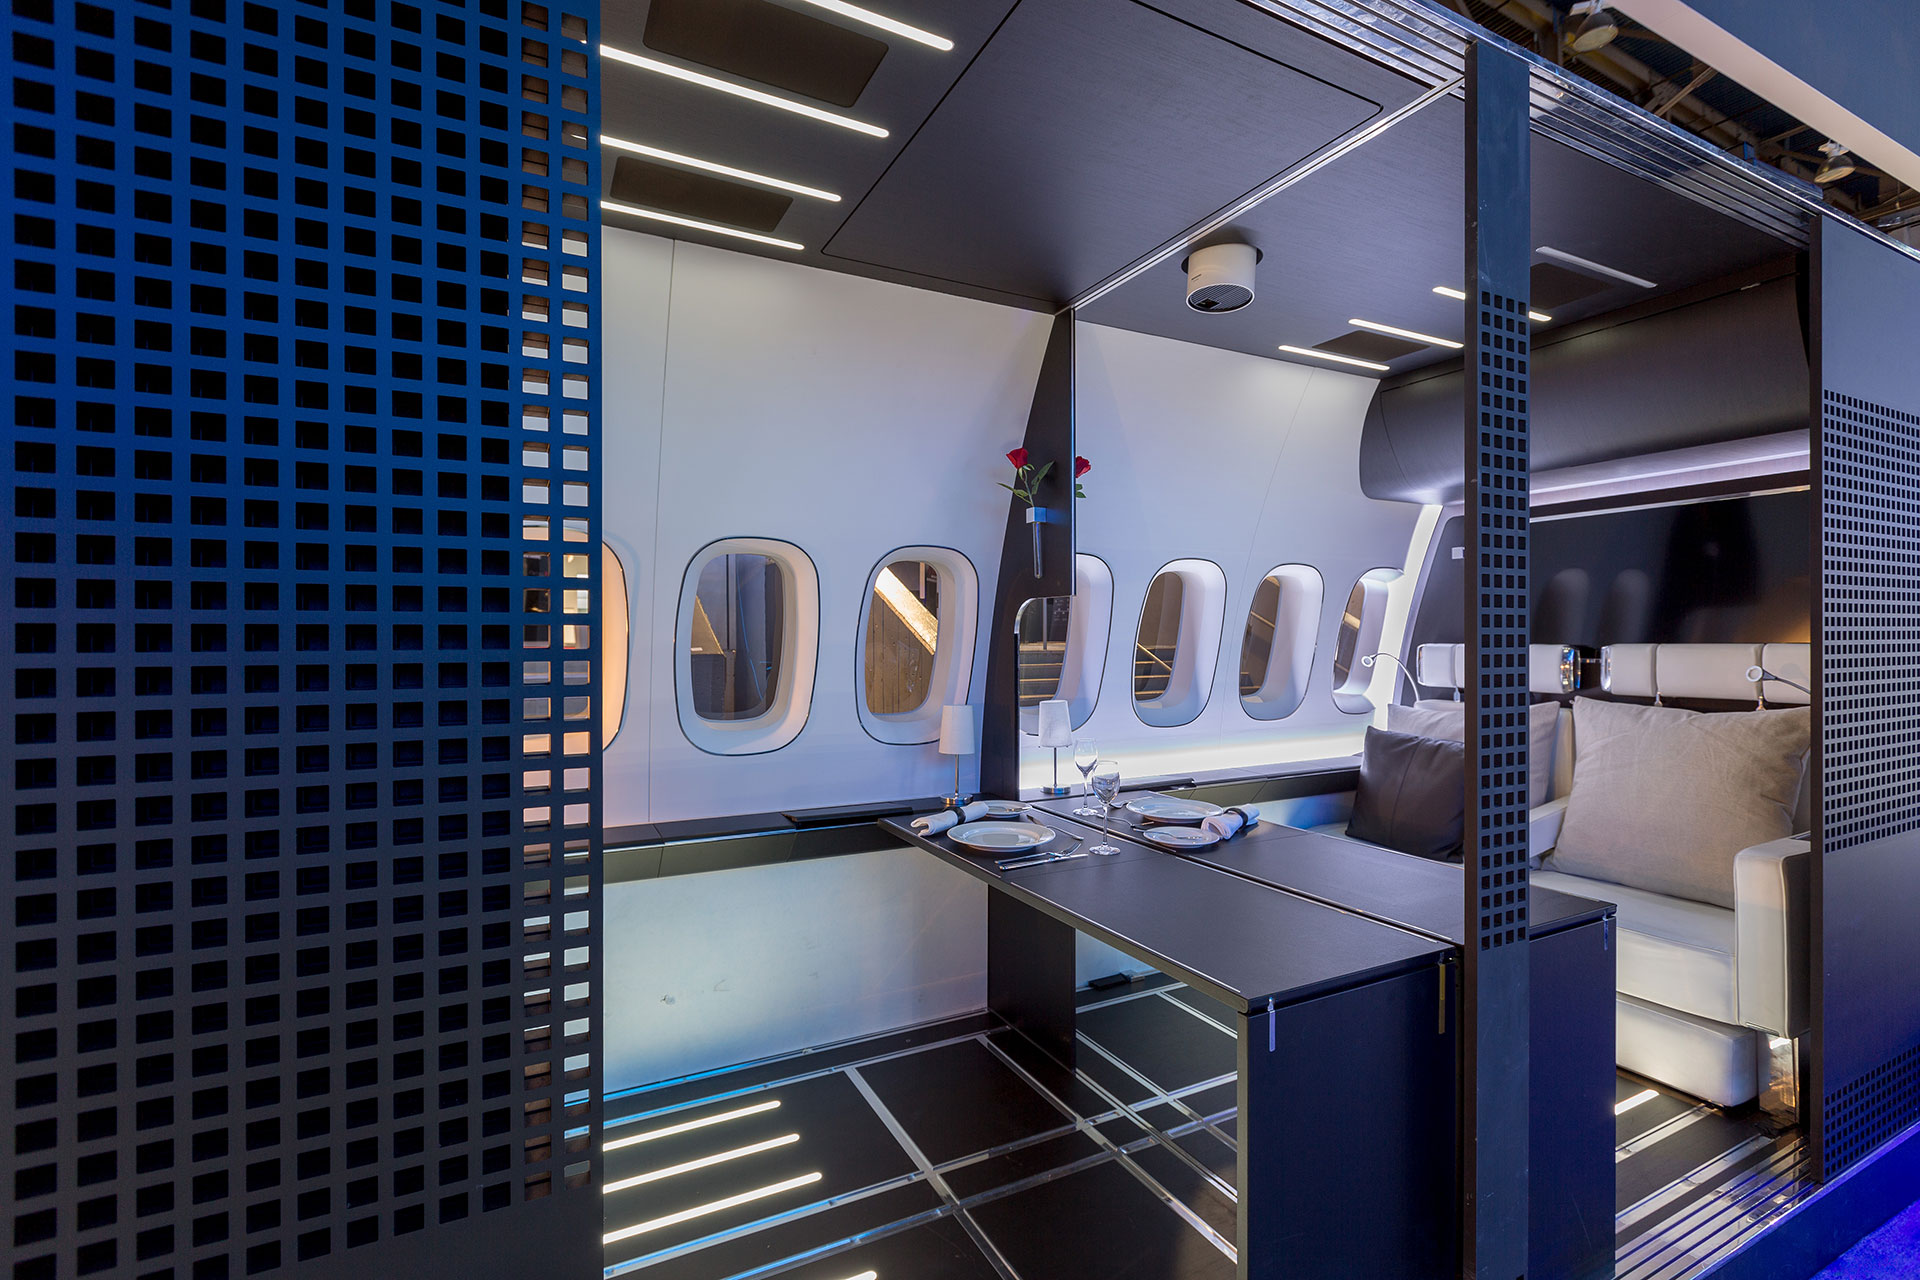 Replica of a First-class aircraft cabin as a trade show exhibit at CES 2016 with dinnerware laid out on a black table with white walls shot from the outside looking in.